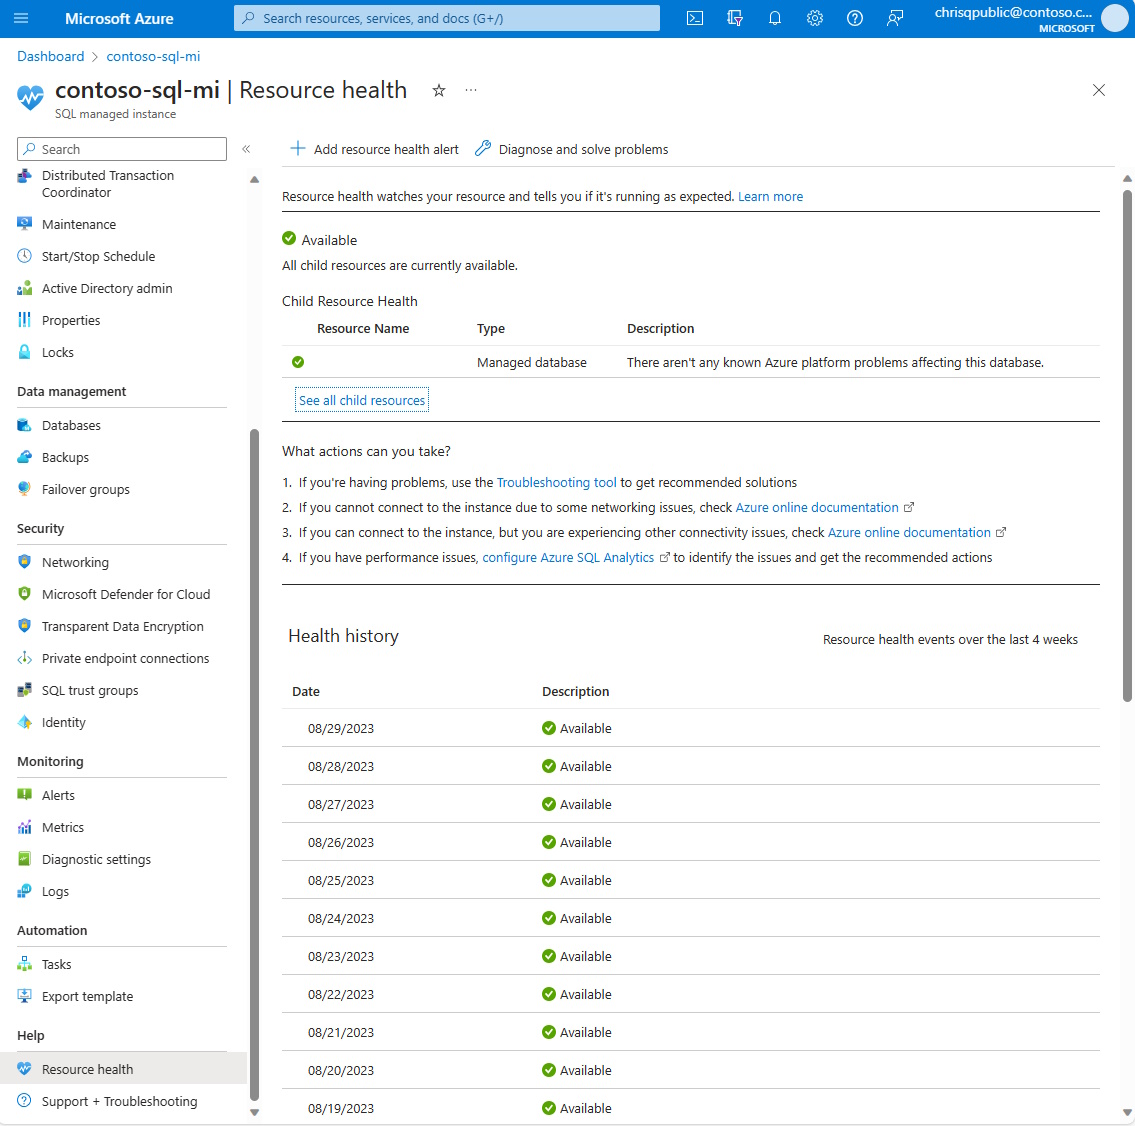 A screenshot of the Azure portal showing the Resource Health page for an Azure SQL Managed Instance.